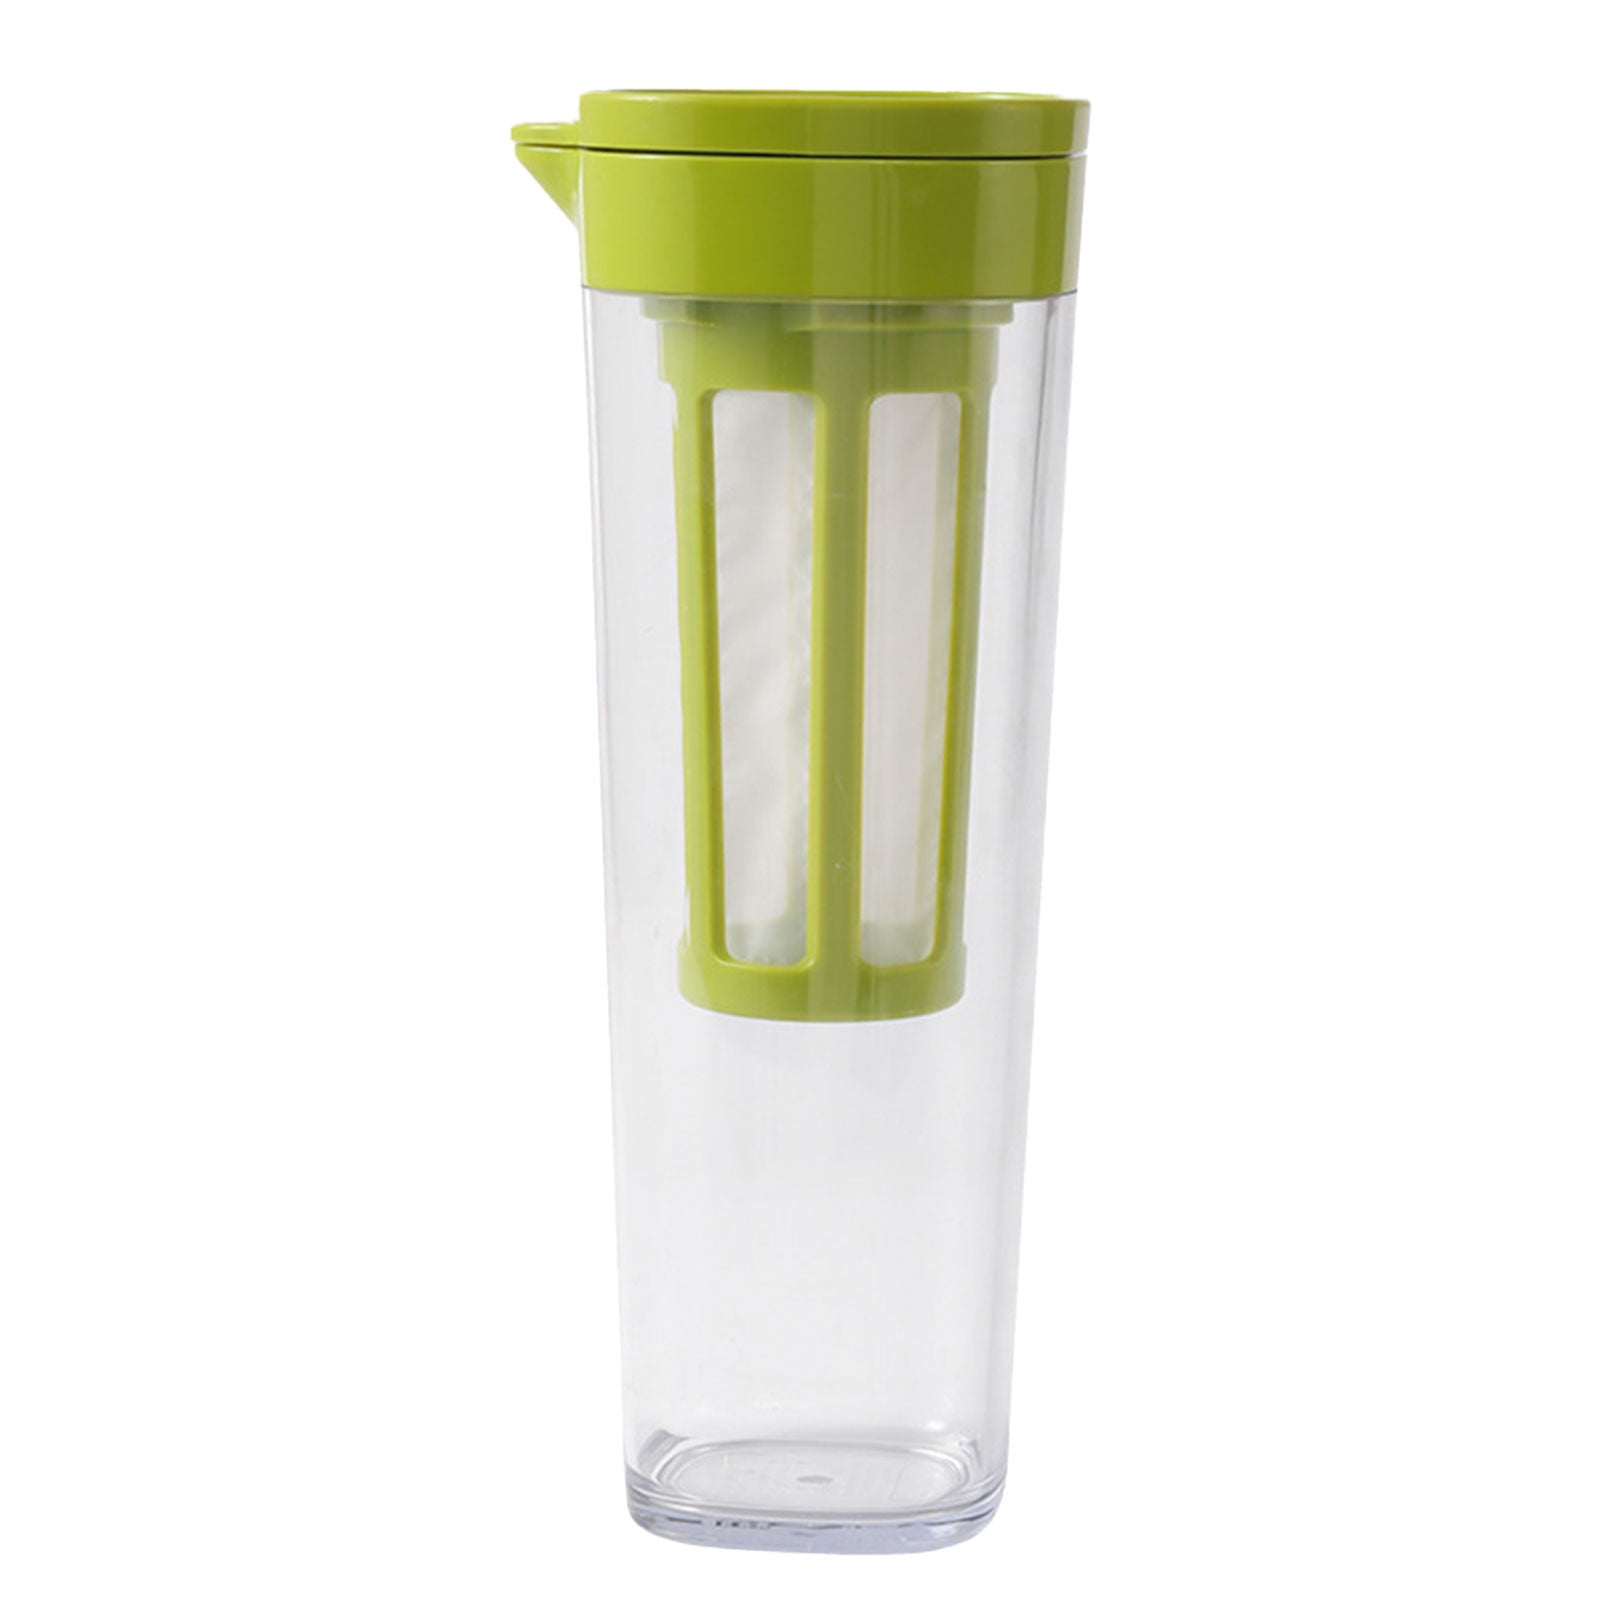 Water Pitcher, Fruit Infuser Pitcher With Removable Lid, High Heat